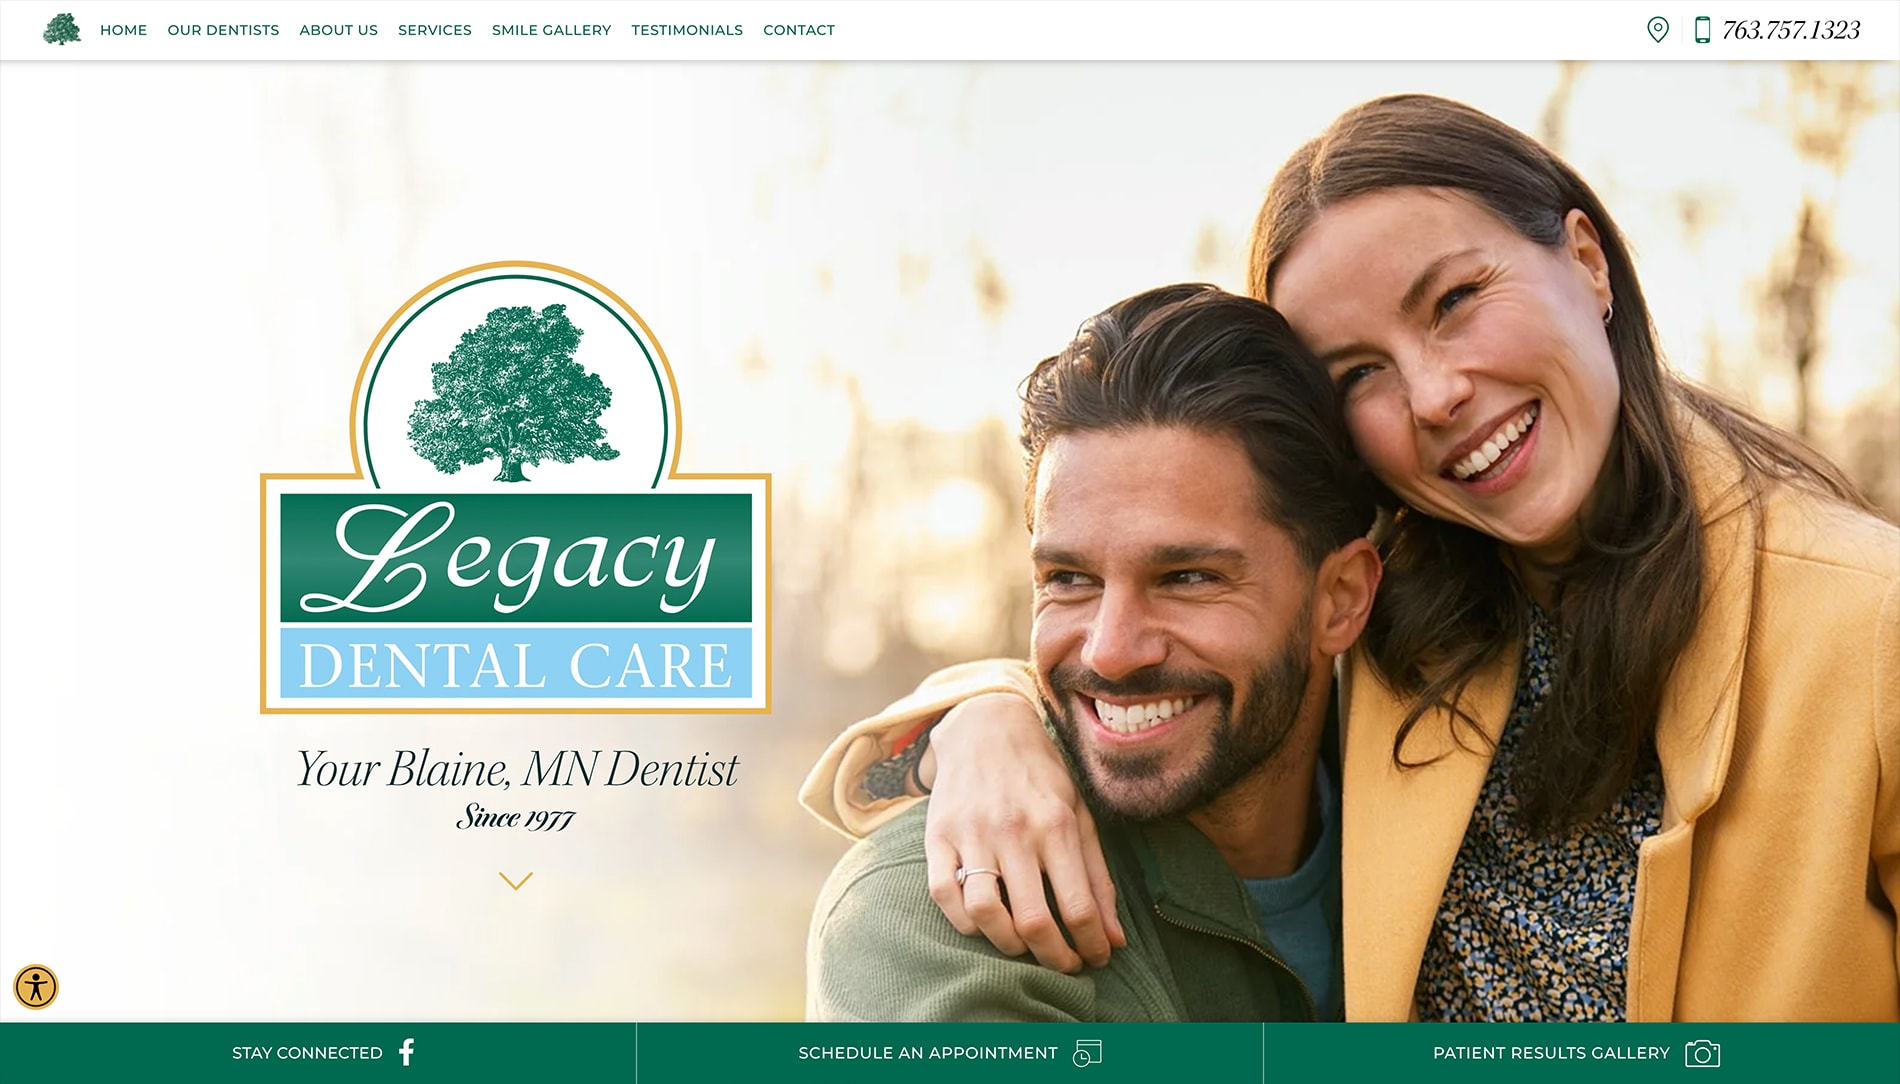 The Blaine Dentists at Legacy Dental Care have launched a new practice website